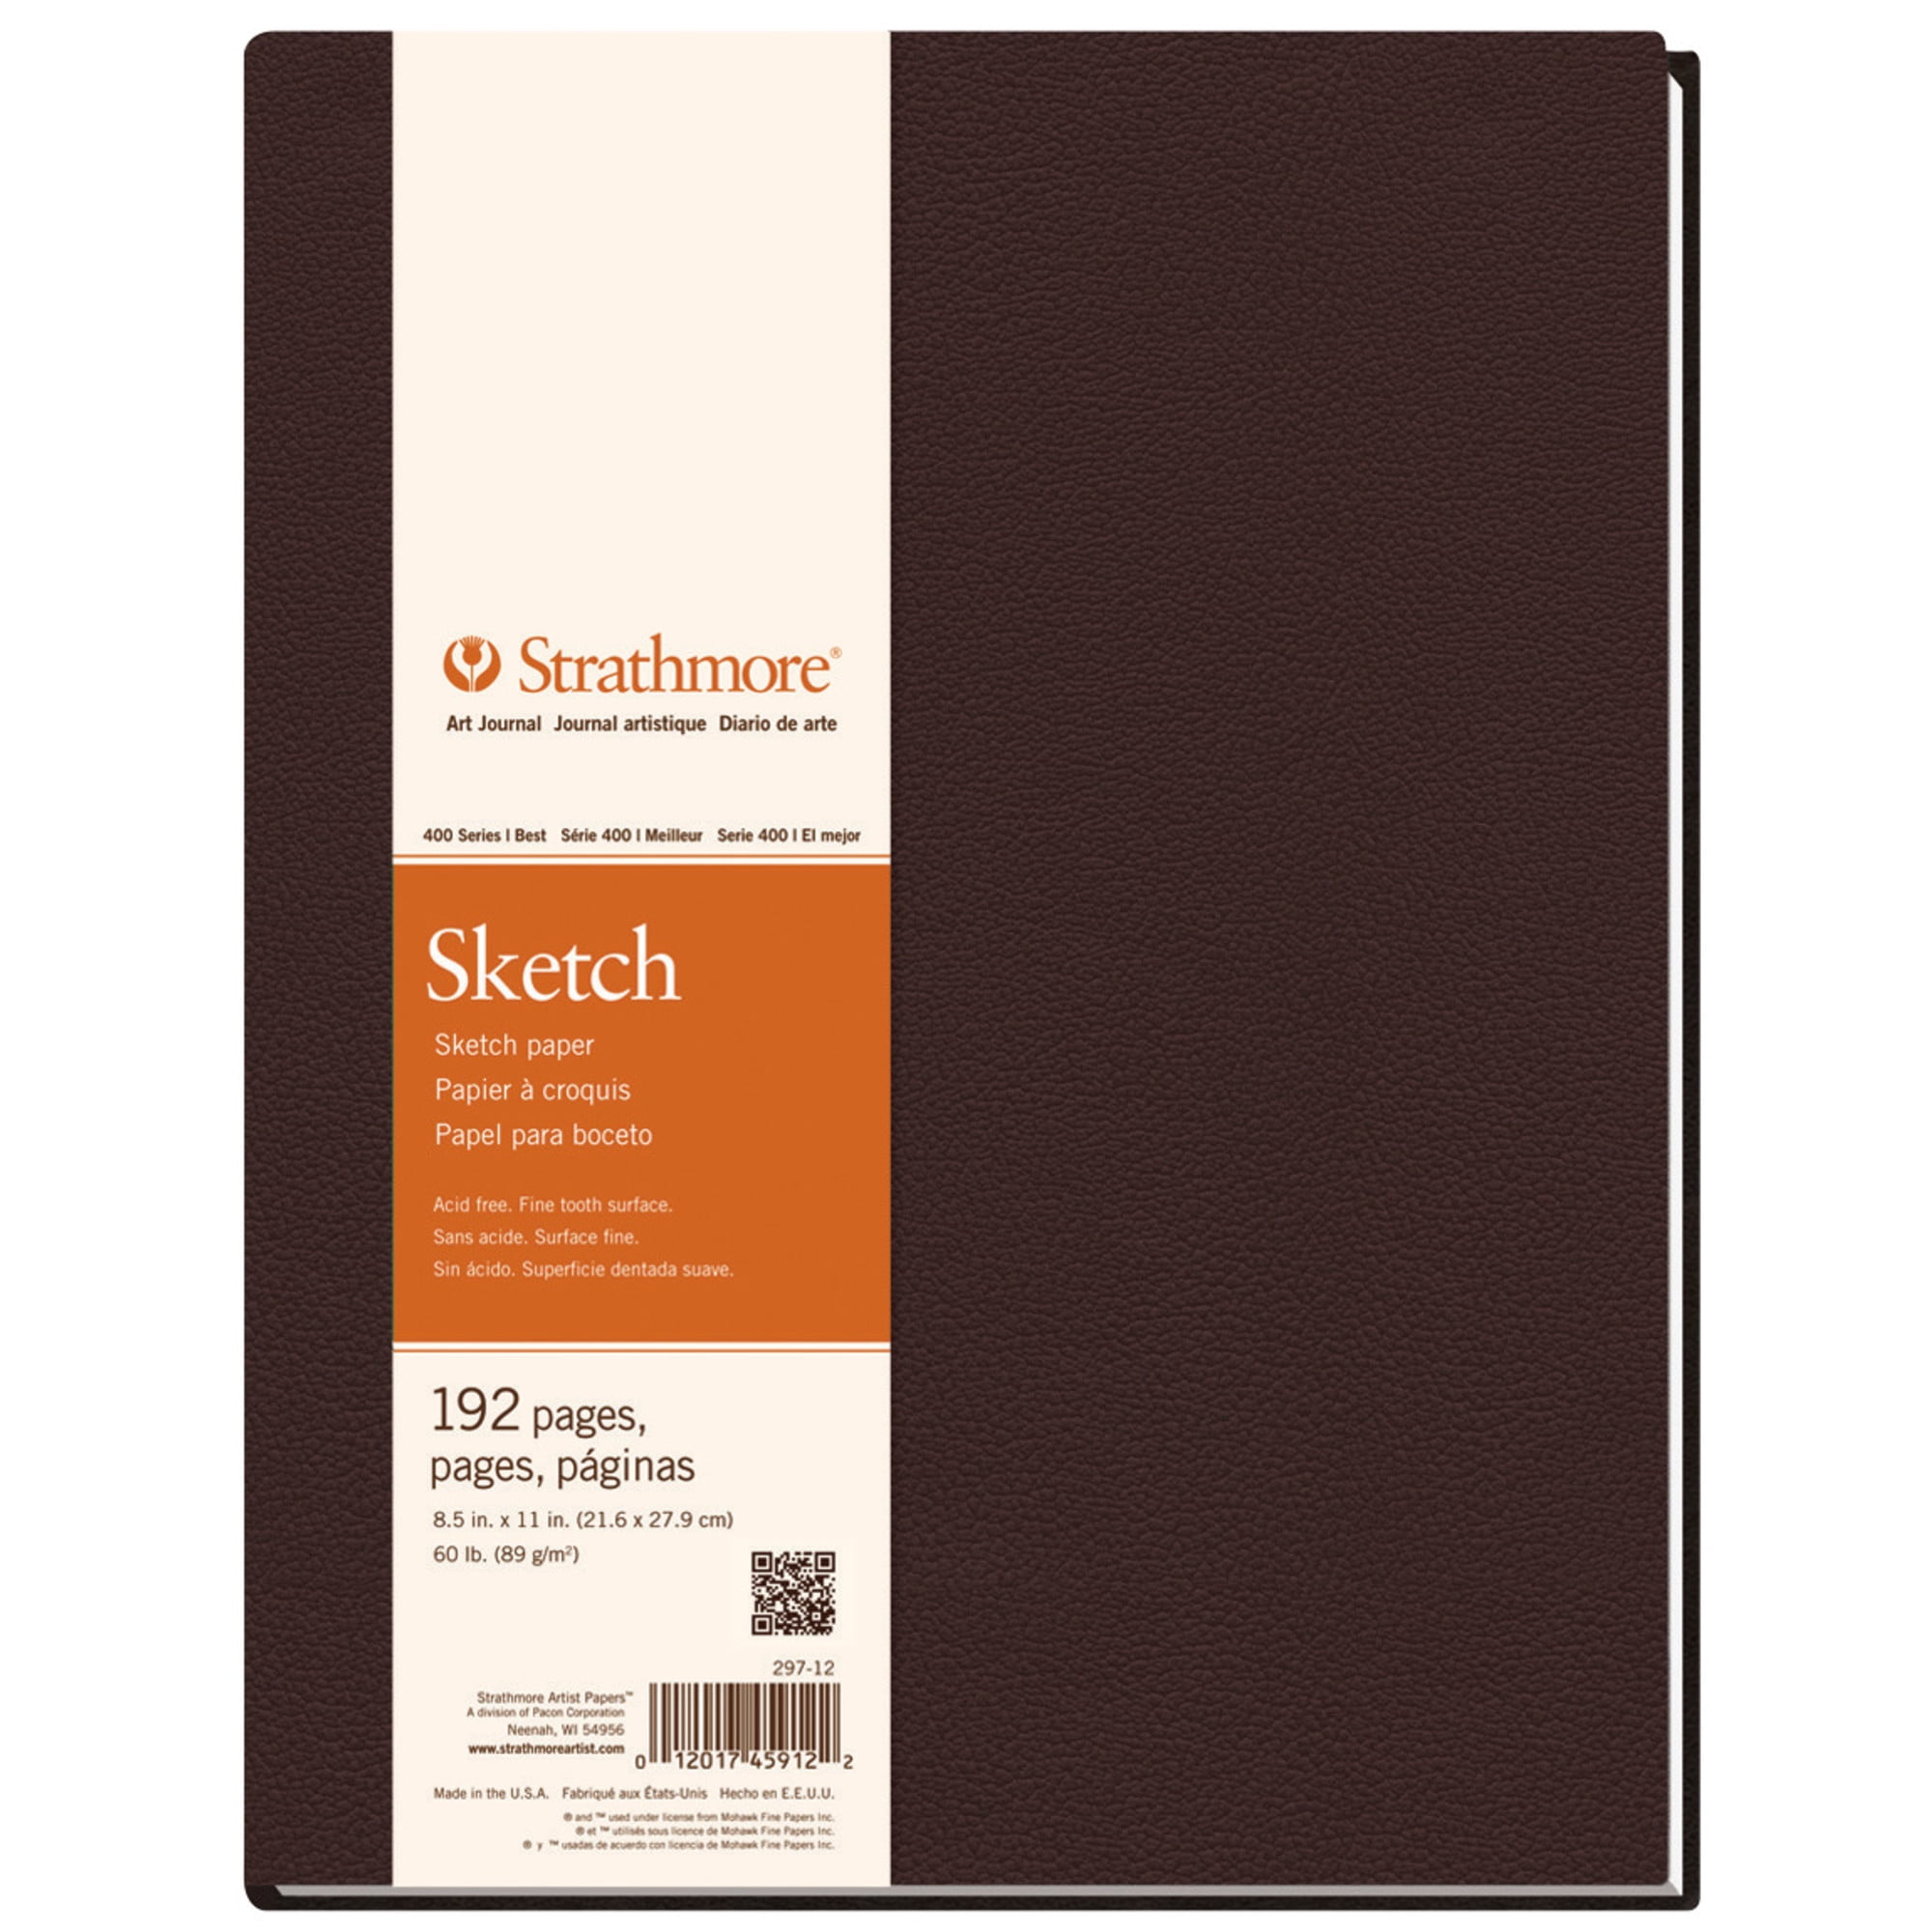 NEW Sealed Sketch Pad 11x14” Hardcover Sketchbook 110 sheets Colored Pencils